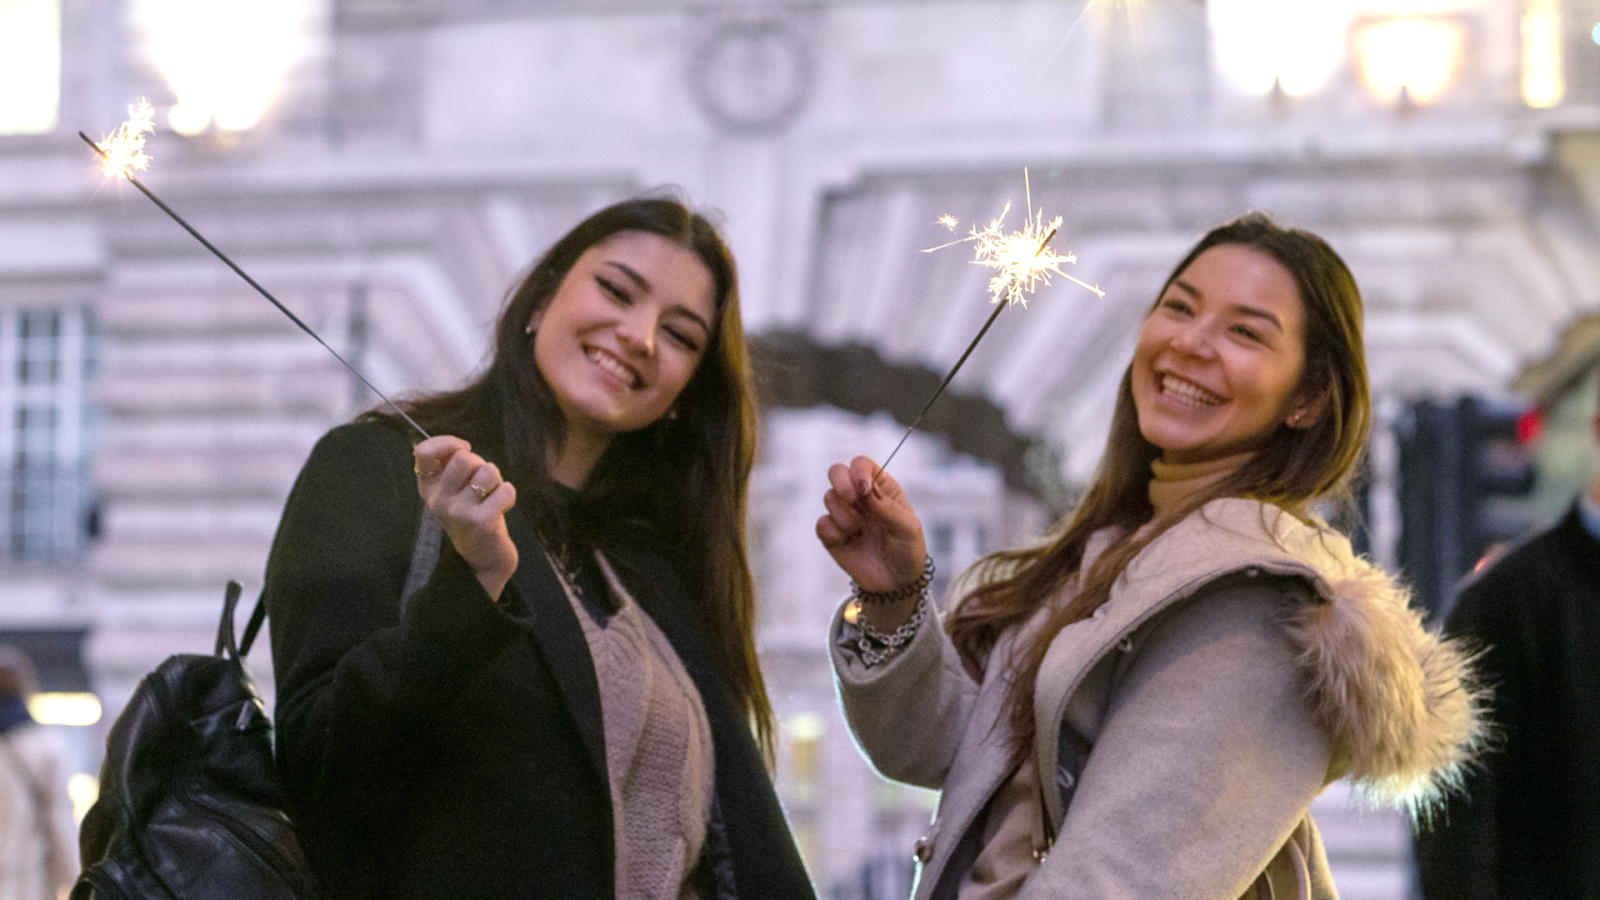 Srudents-with-sparklers-london-3